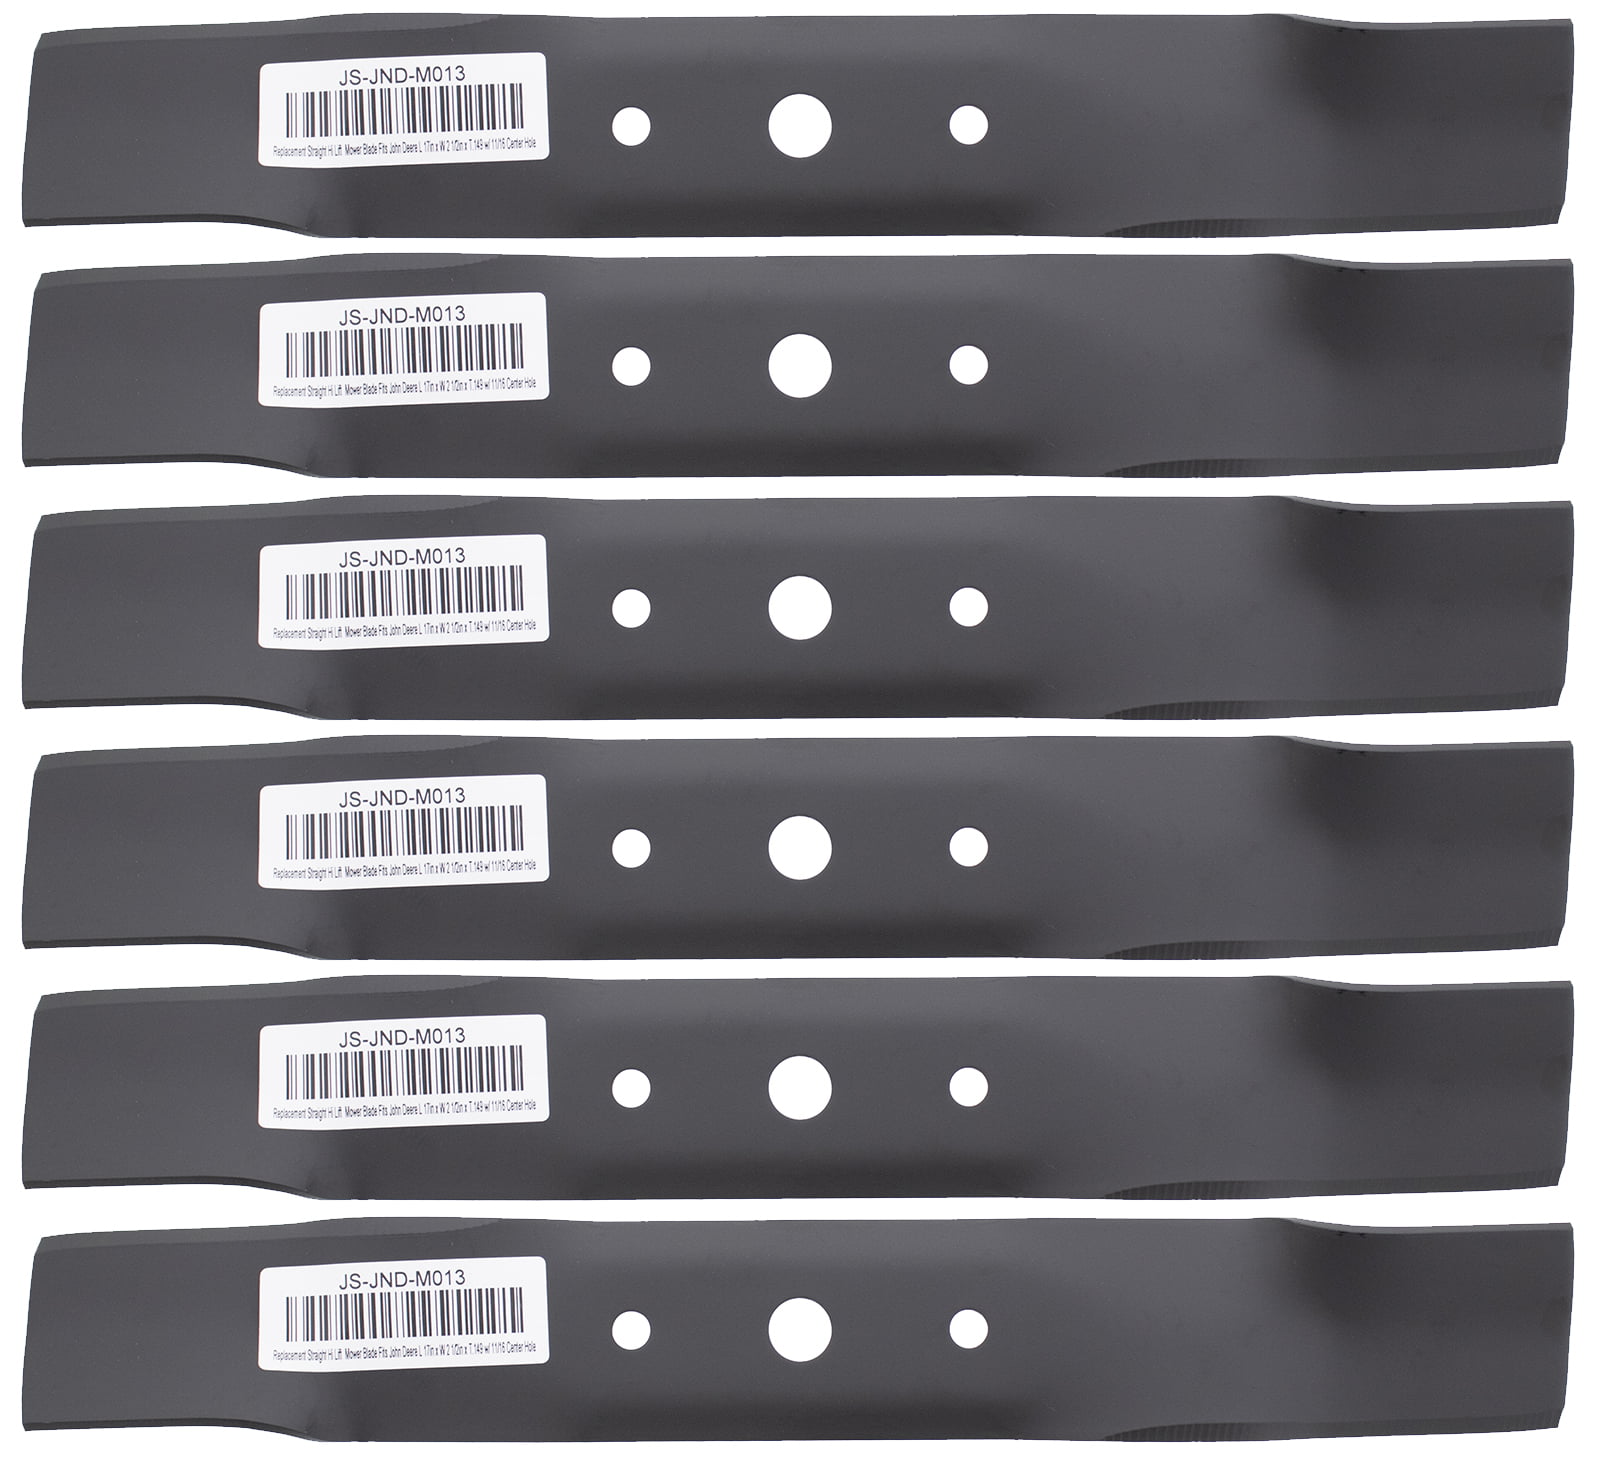 91-108 6 Pack of Blades for JOHN DEERE GX20250 10634 330-619 GY20568